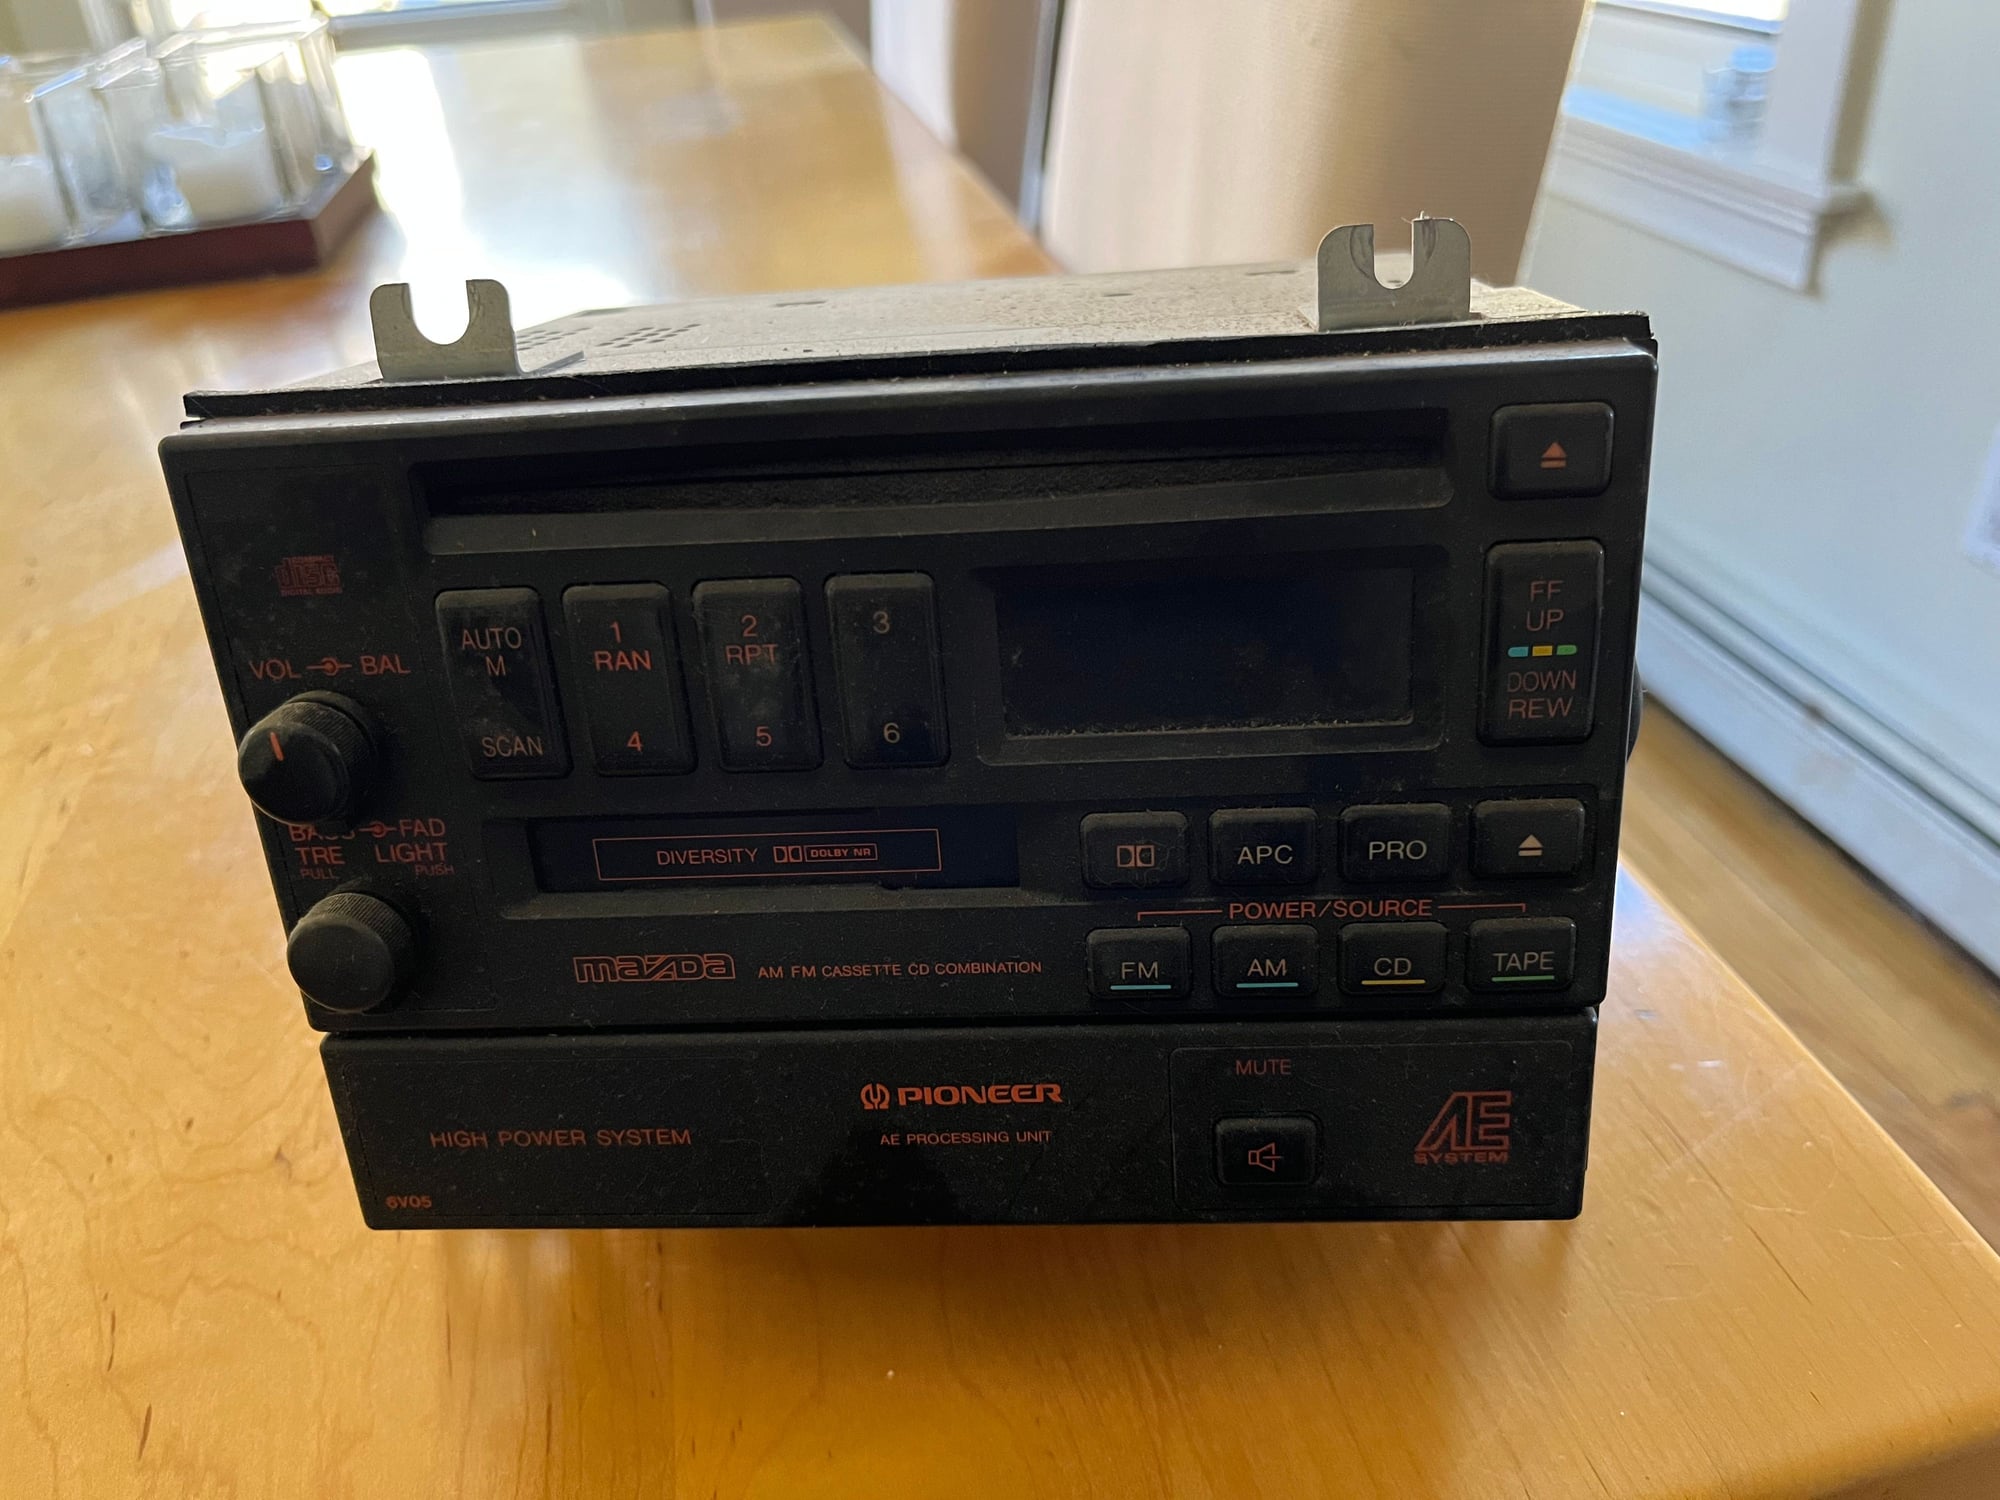 Audio Video/Electronics - FC head unit free for shipping for repair or parts - Used - 1988 to 1992 Mazda RX-7 - Jamaica Plain, MA 02130, United States